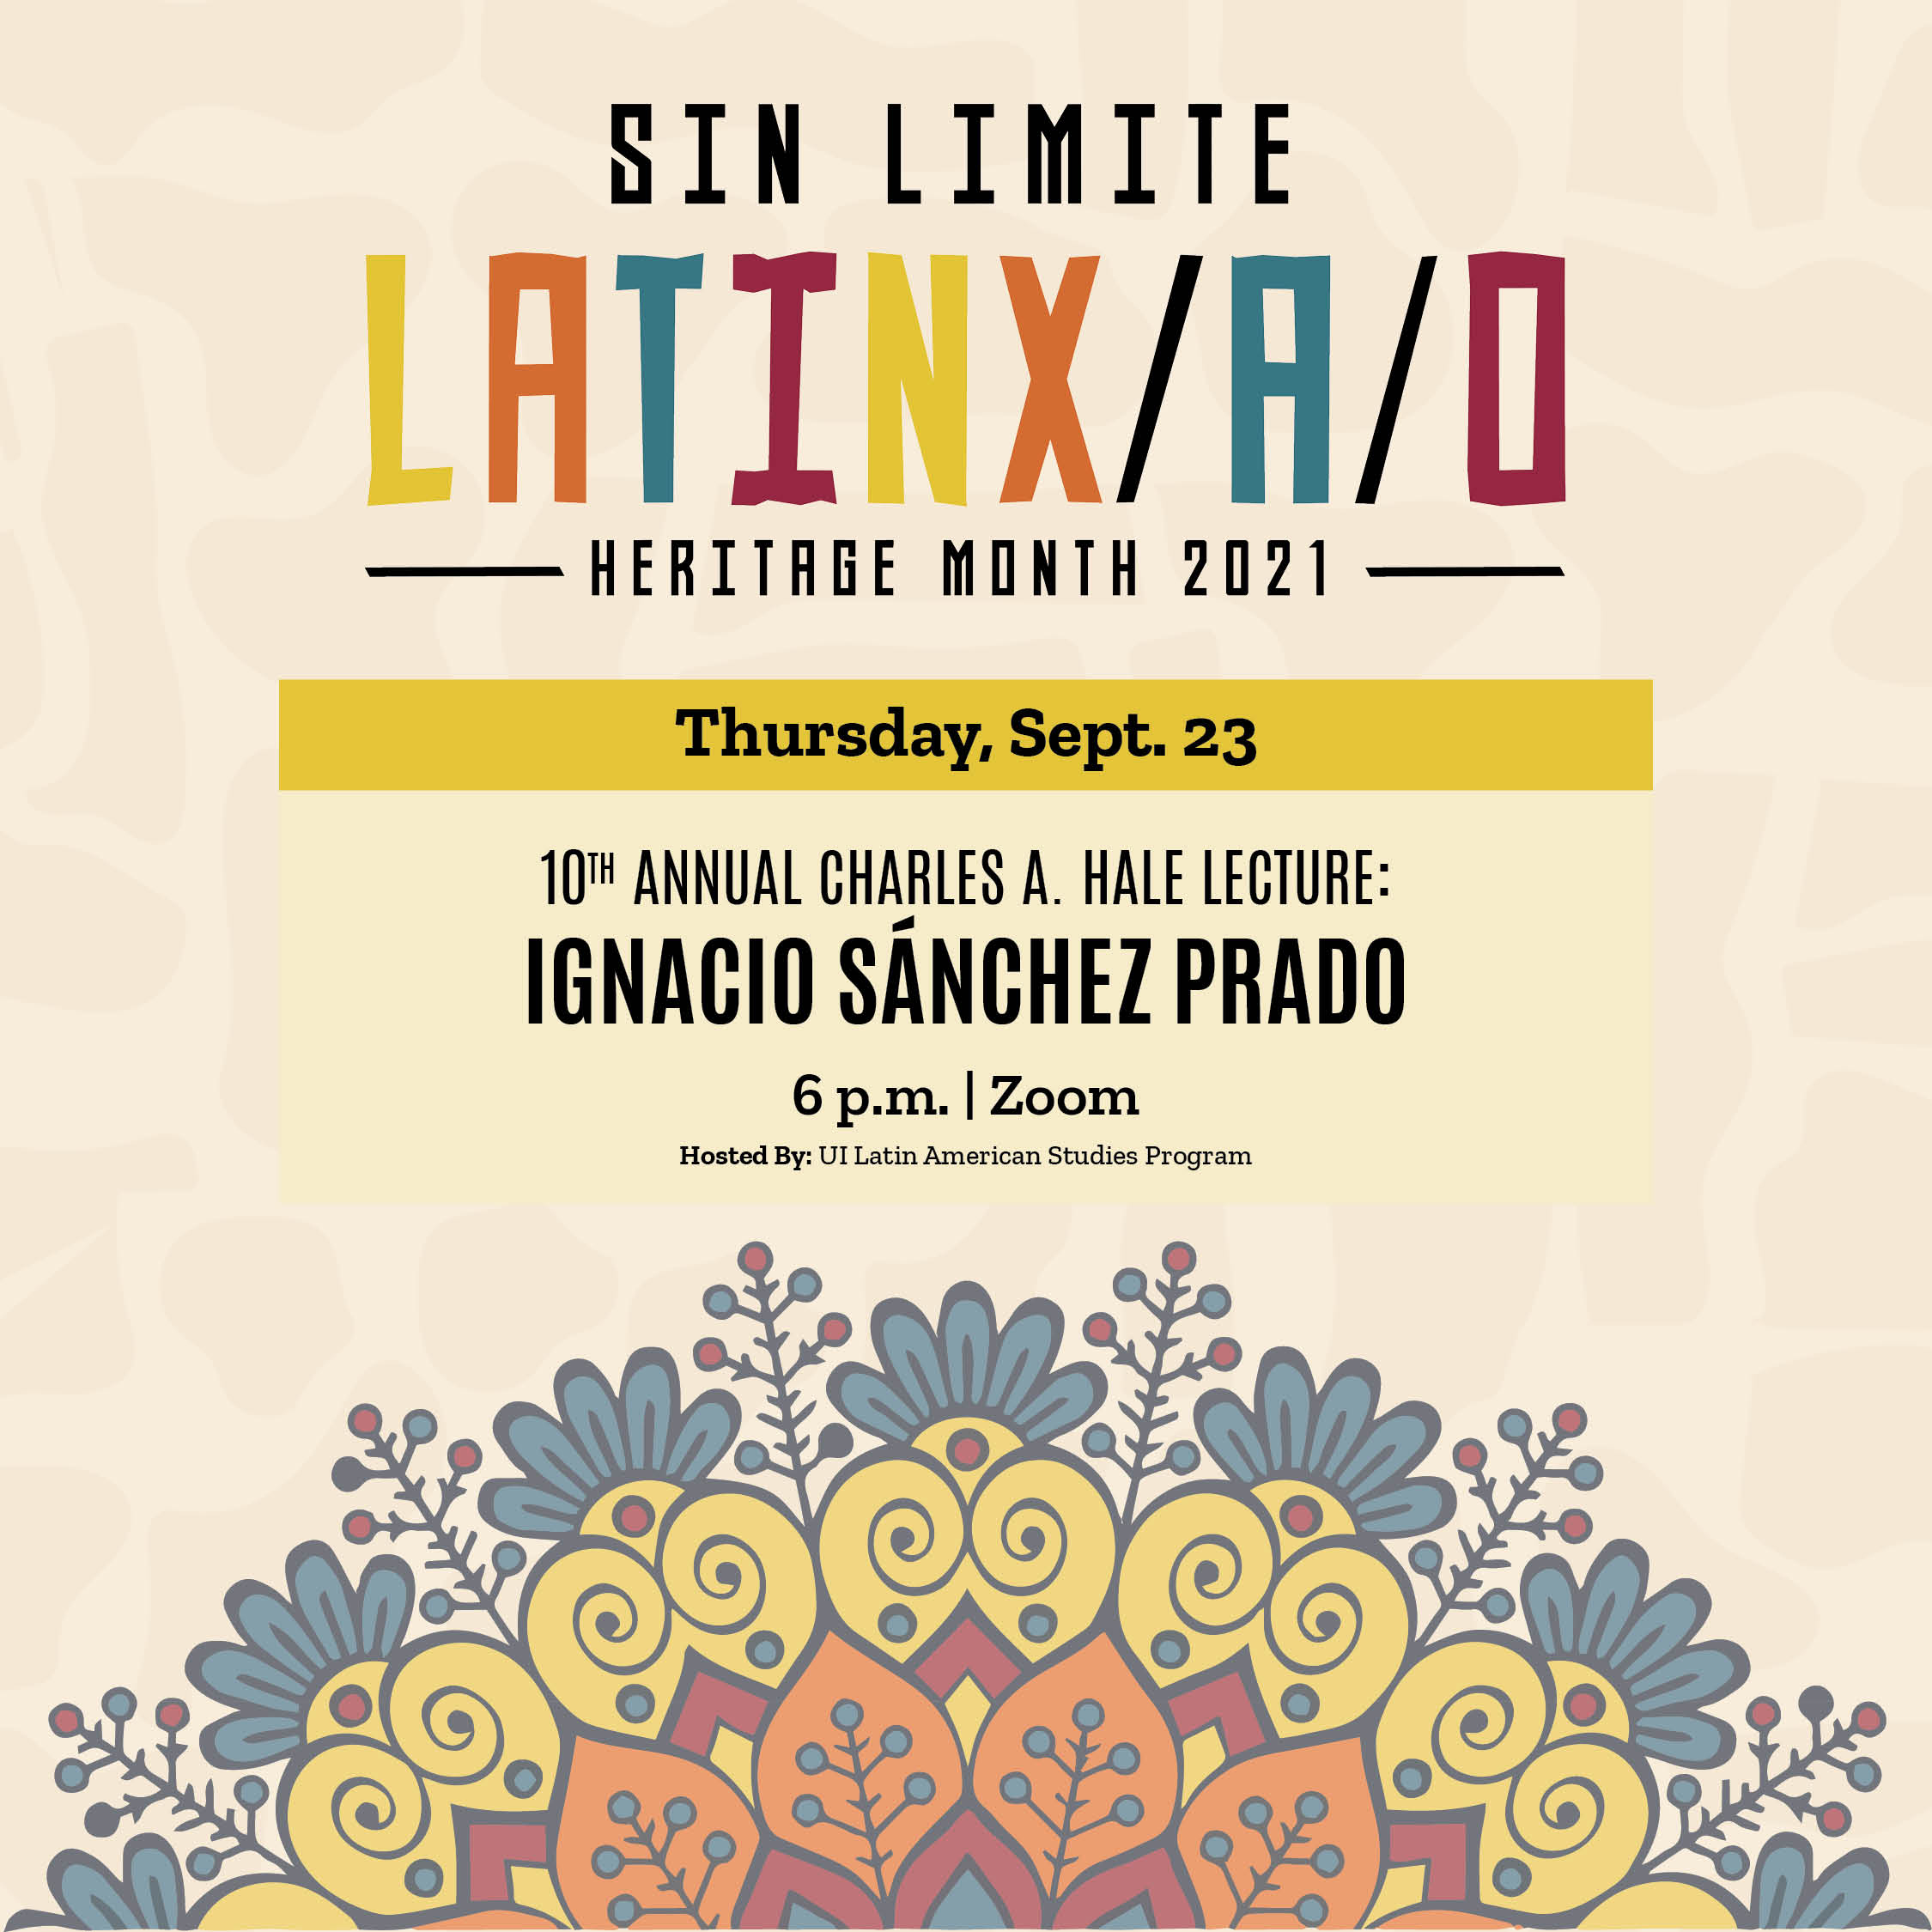 An image of the floral design and text that says 'SIN LIMITE LATINX/A/O HERITAGE MONTH 2021 Thursday, Sept. 23 10TH ANNUAL CHARLES A. HALE LECTURE: IGNACIO SÁNCHEZ PRADO 6p.m. Zoom HostedBy:UILatinAmericanStudies Program'